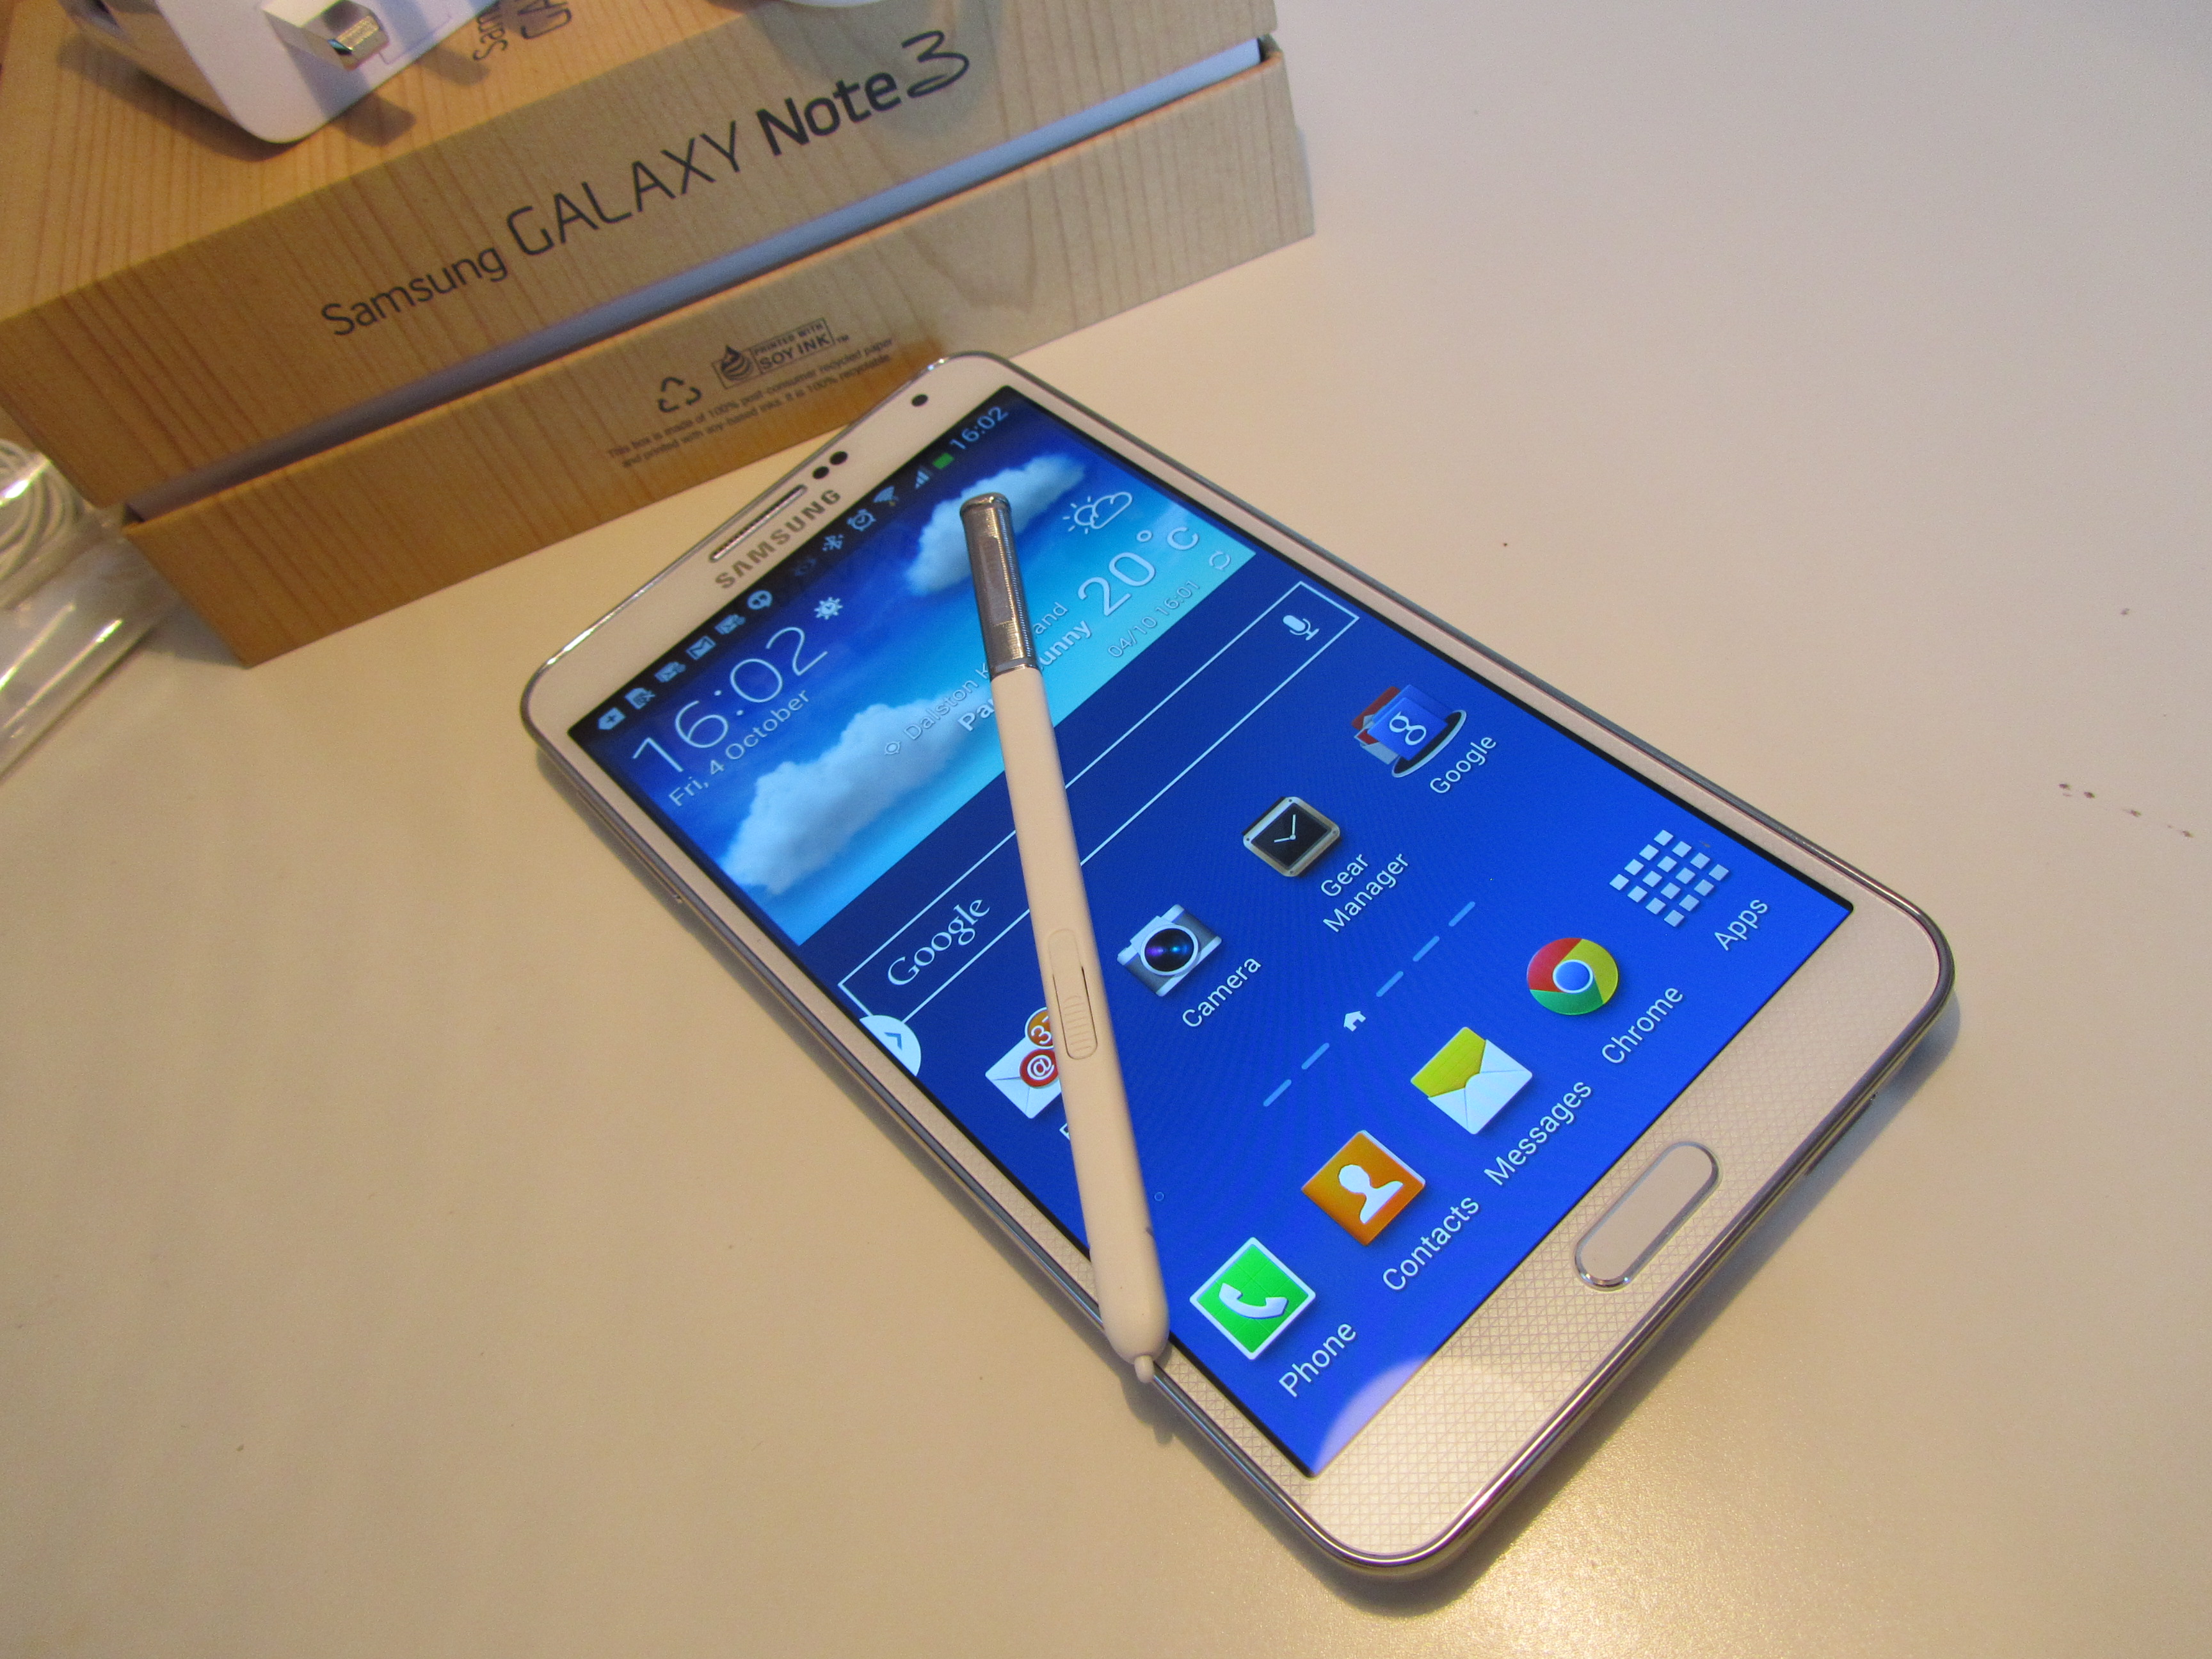 Note3 SPen Samsung Galaxy Note 3 review: One of the best Android handsets money can buy, if you can hold it